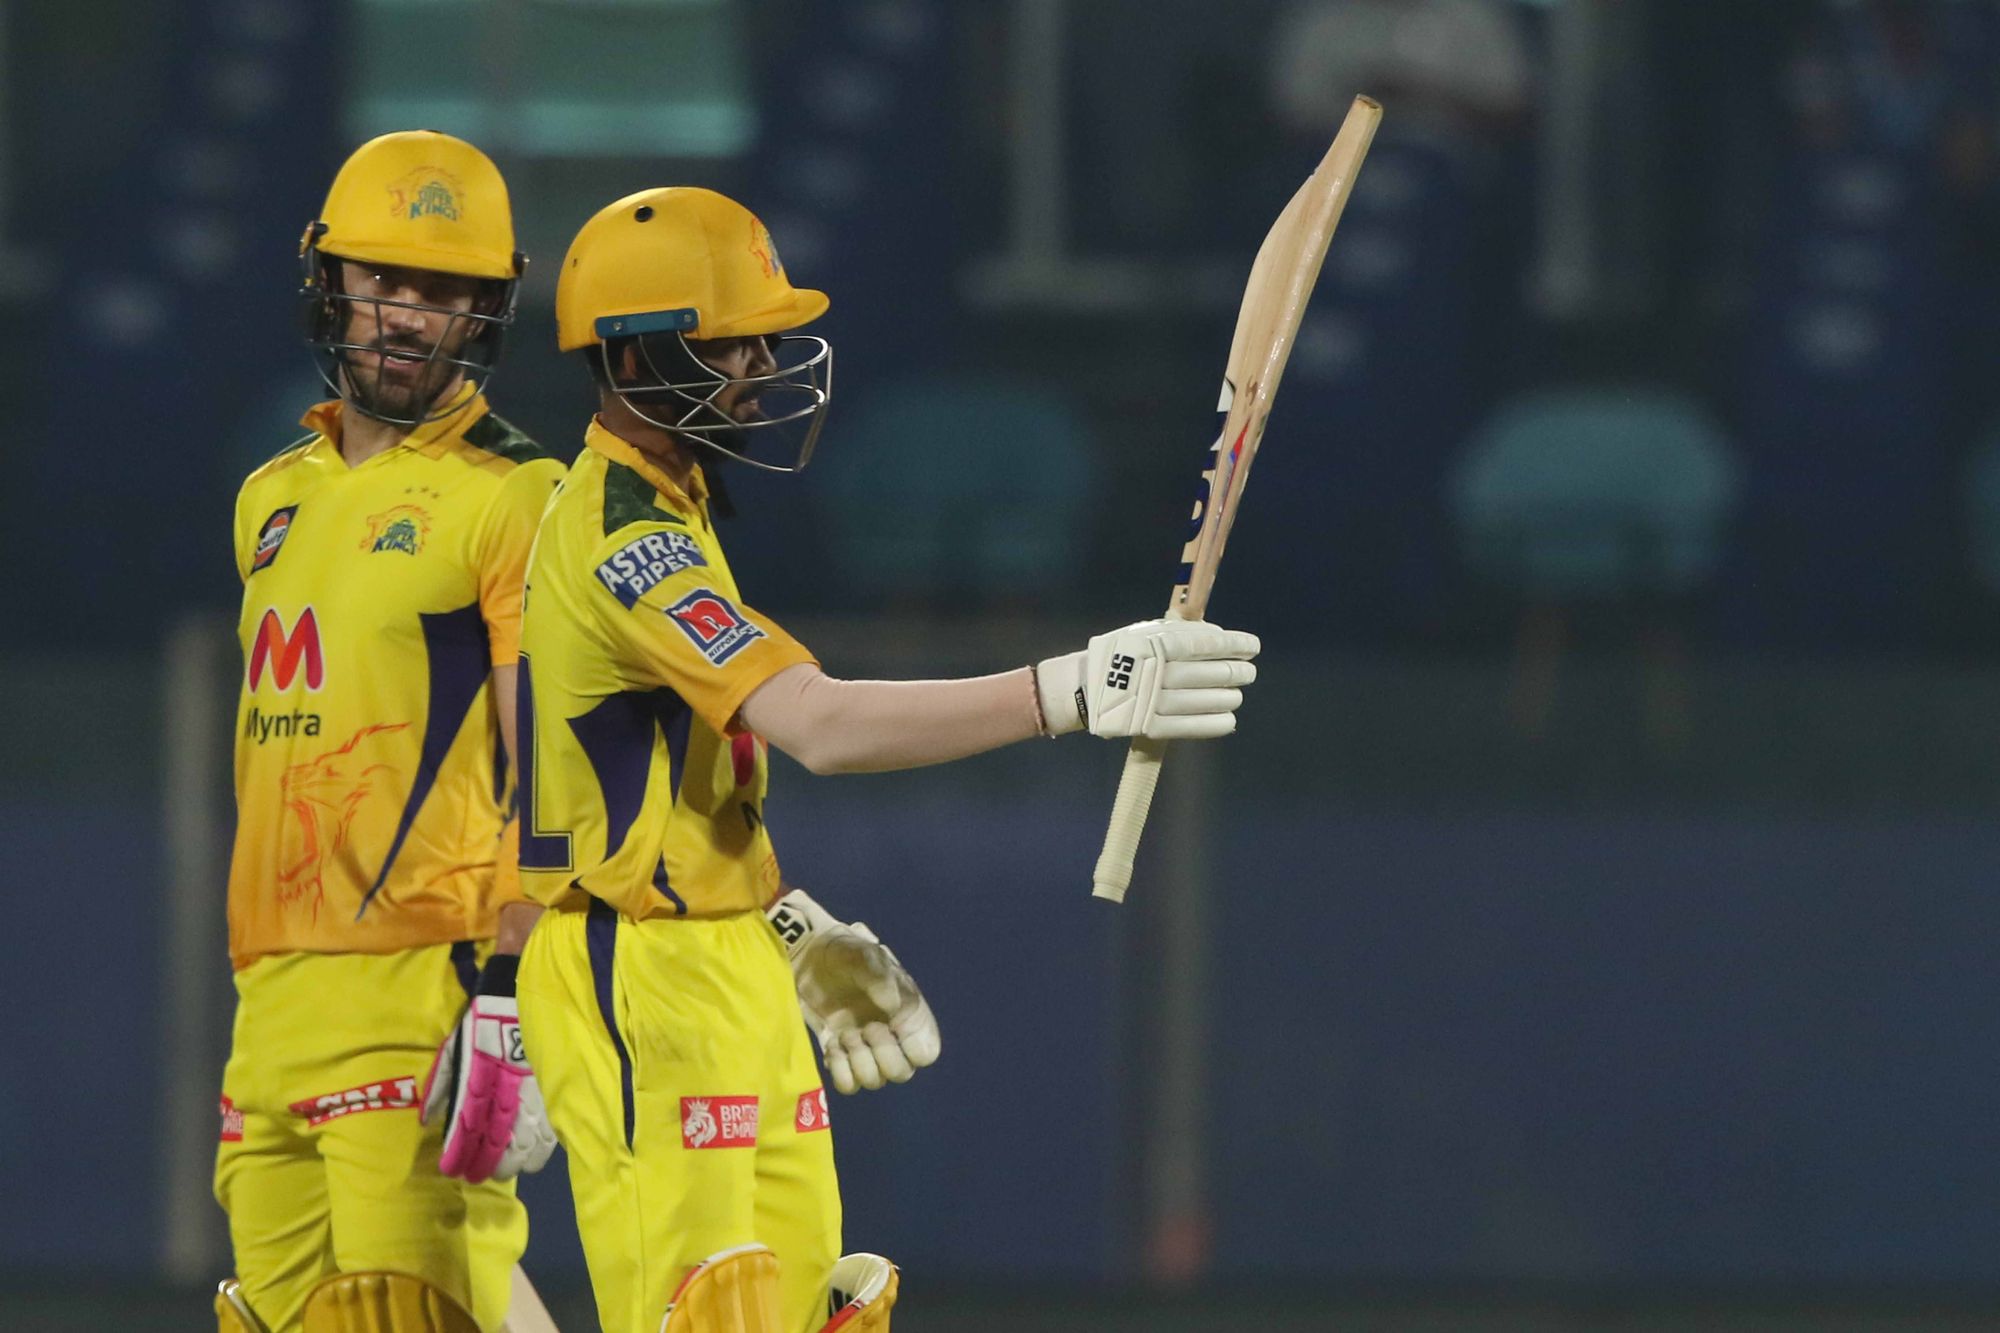 CSK thrashed SRH by 7 wickets | BCCI/IPL